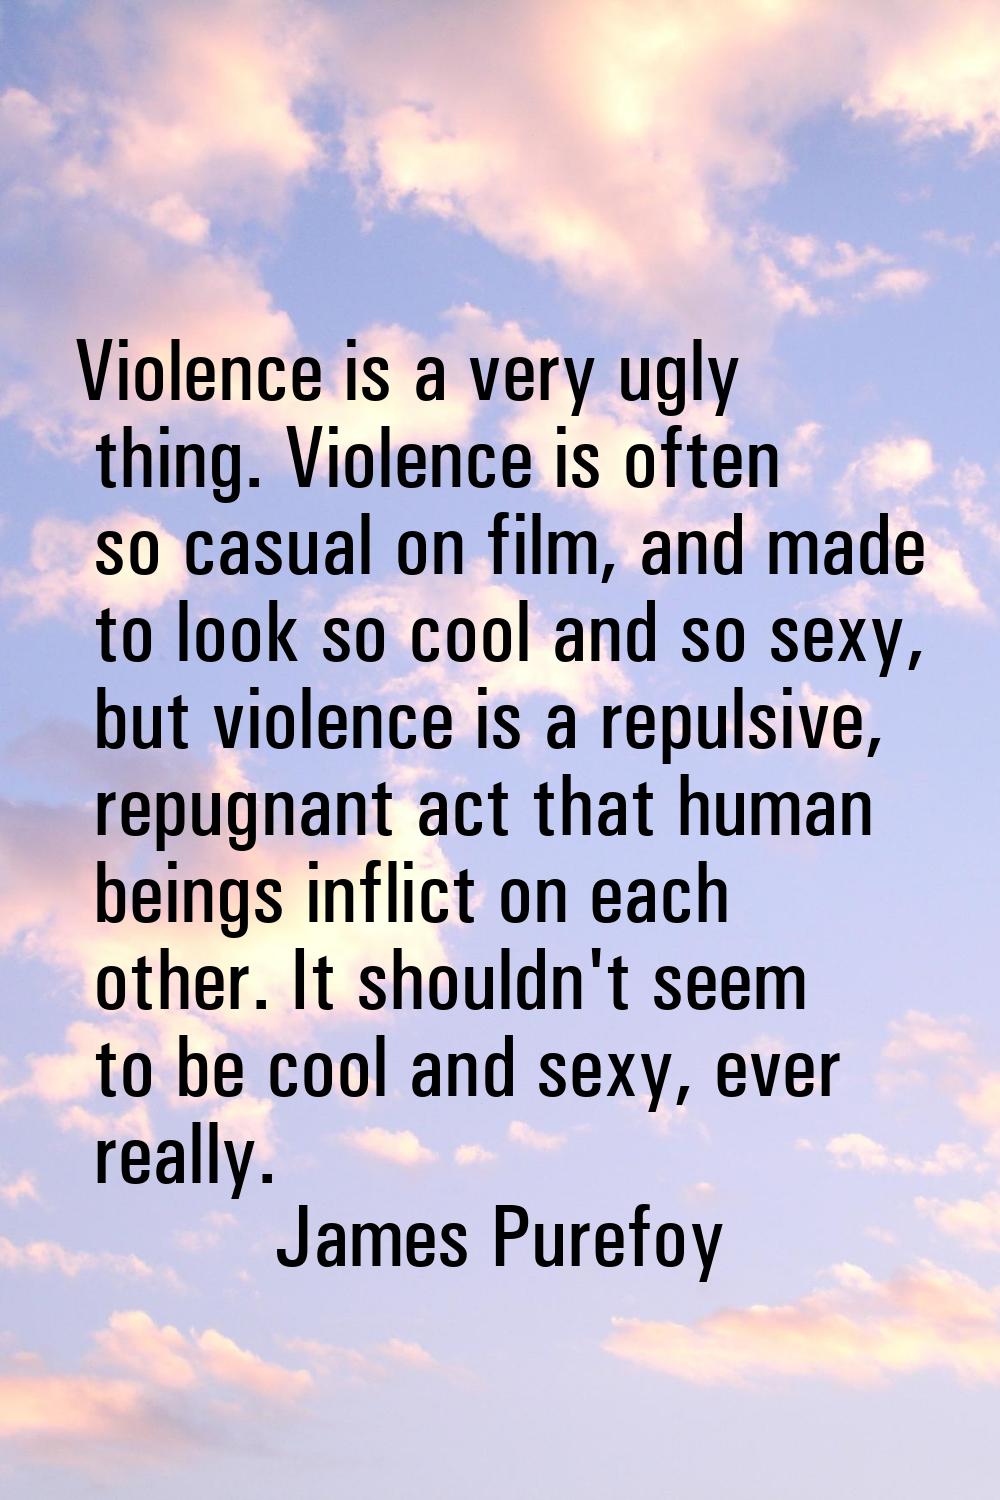 Violence is a very ugly thing. Violence is often so casual on film, and made to look so cool and so